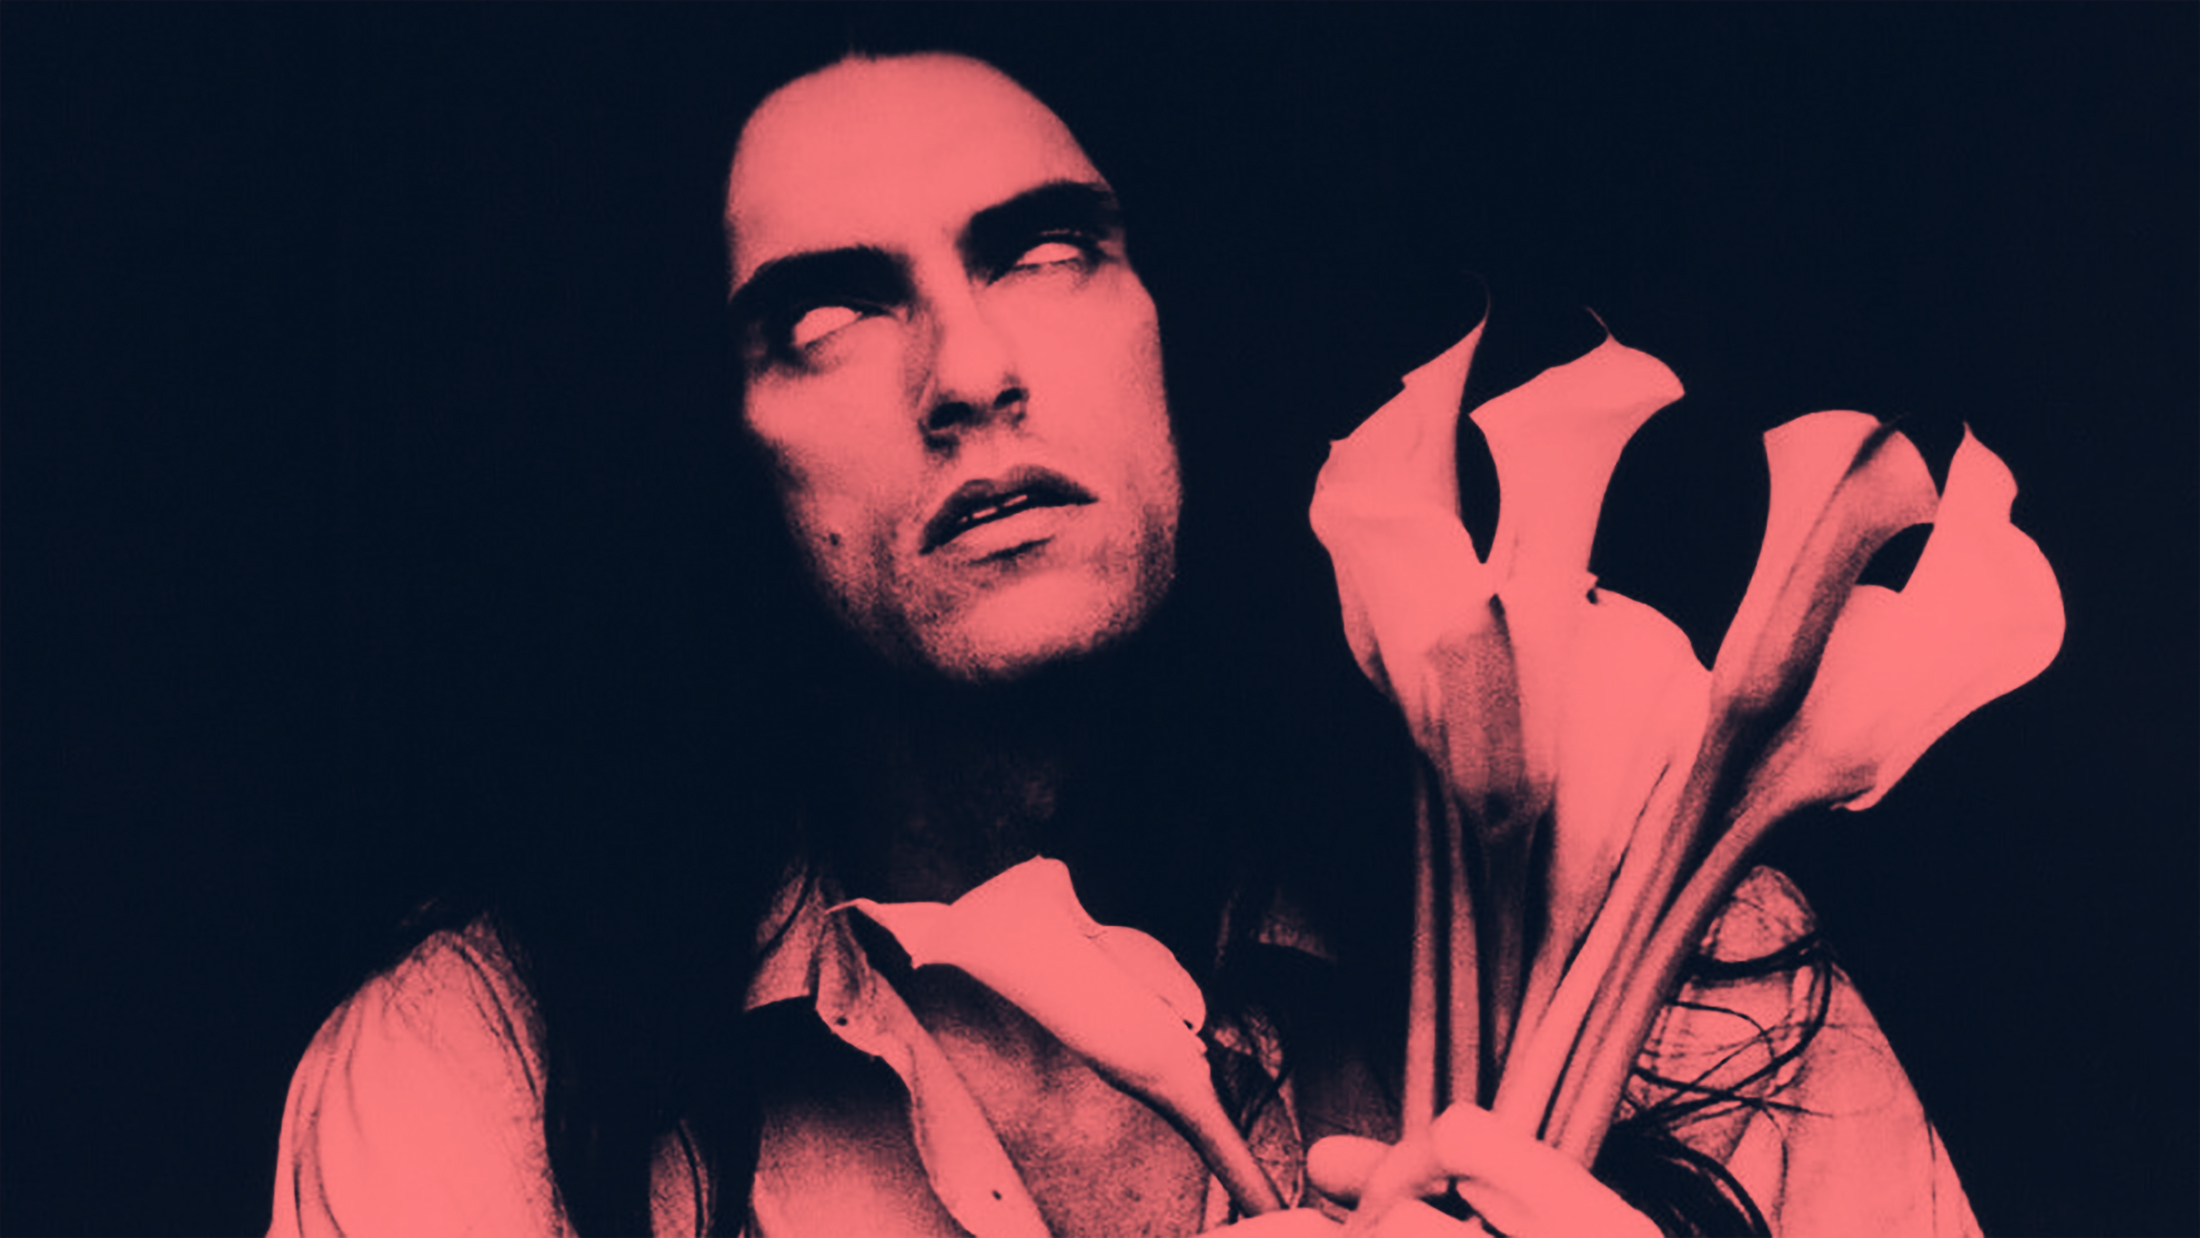 centerfold of peter steele from 1985 playgirl magazine